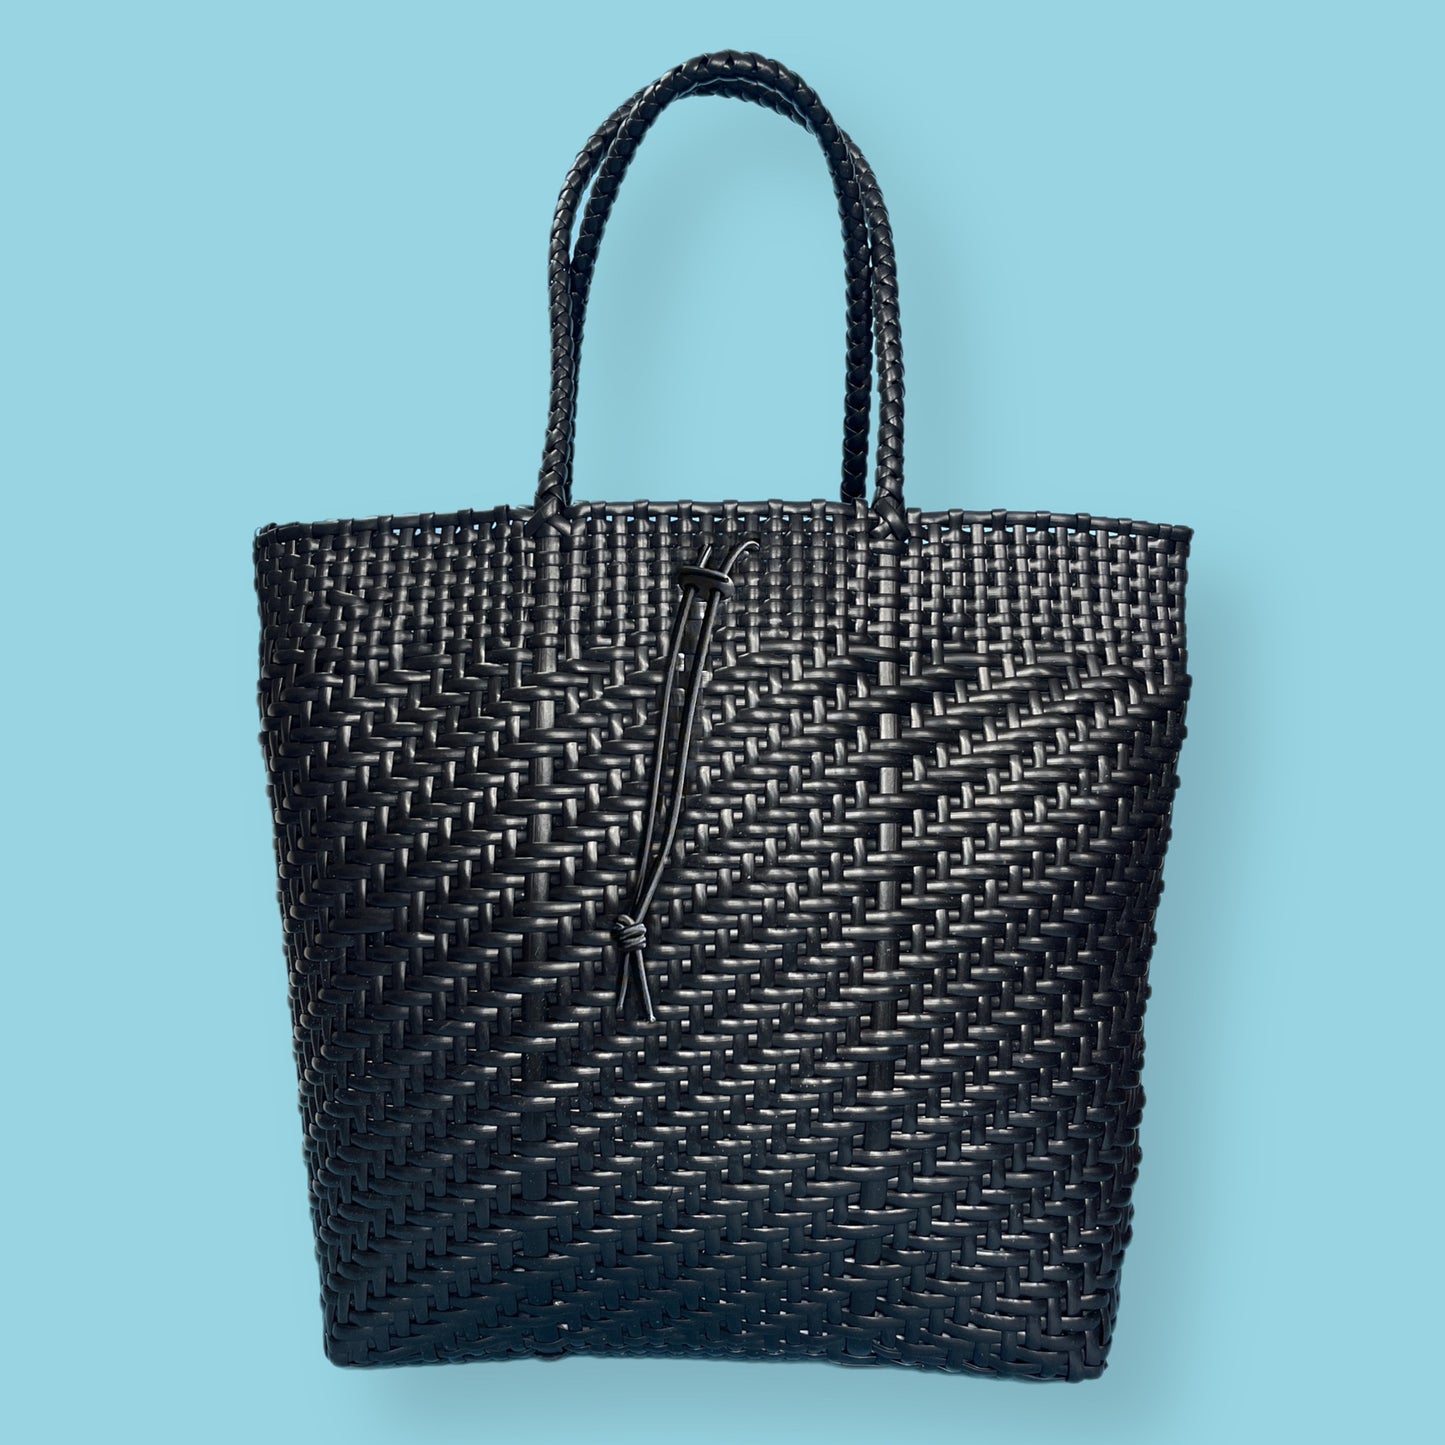 Bicycle Pannier recycled black plastic woven basket tote bag large